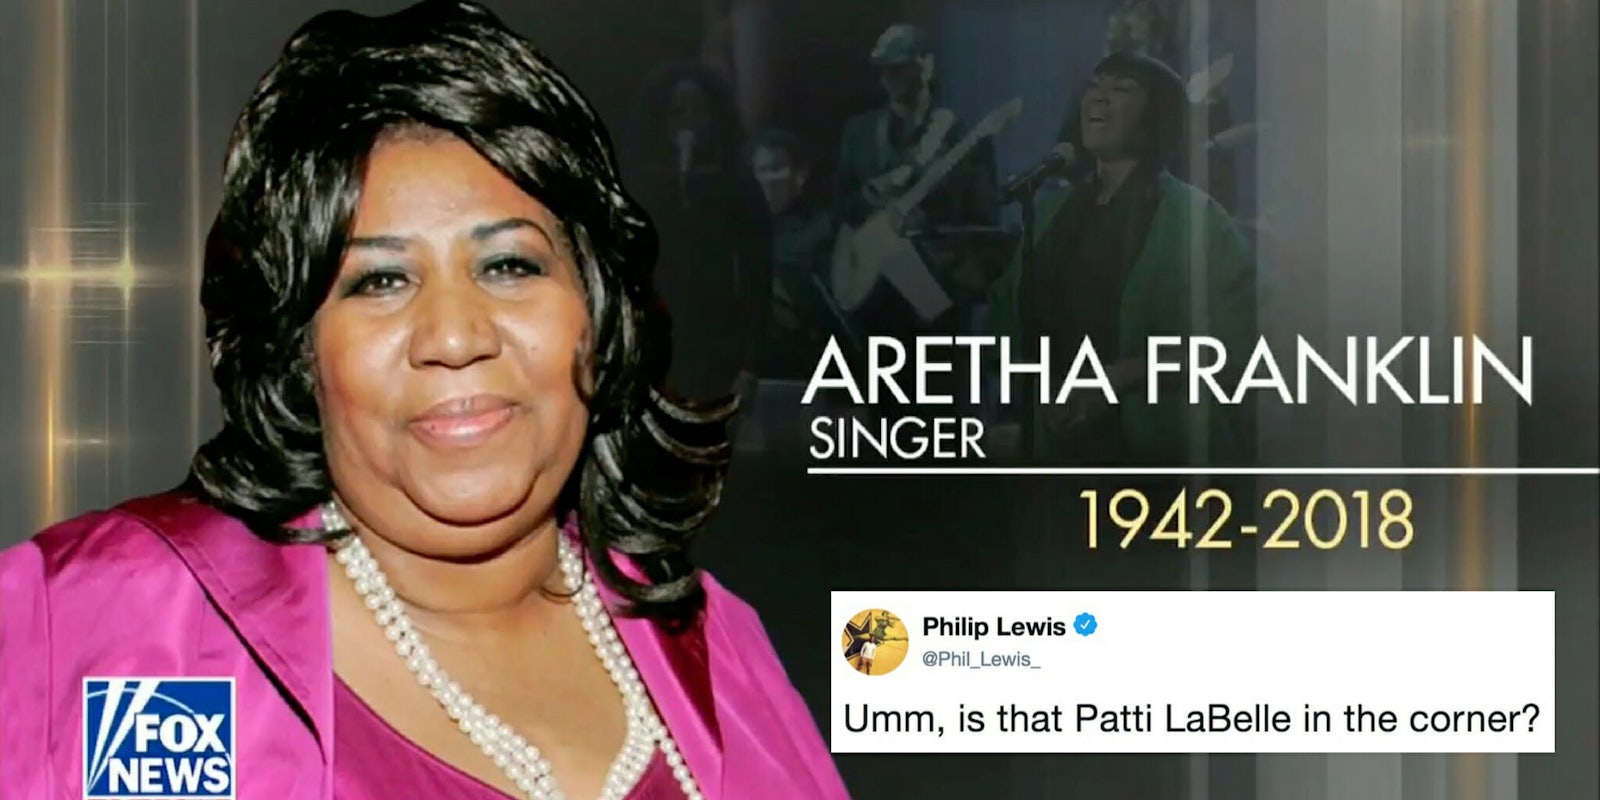 Fox News mistakes Patti LaBelle for Aretha Franklin.